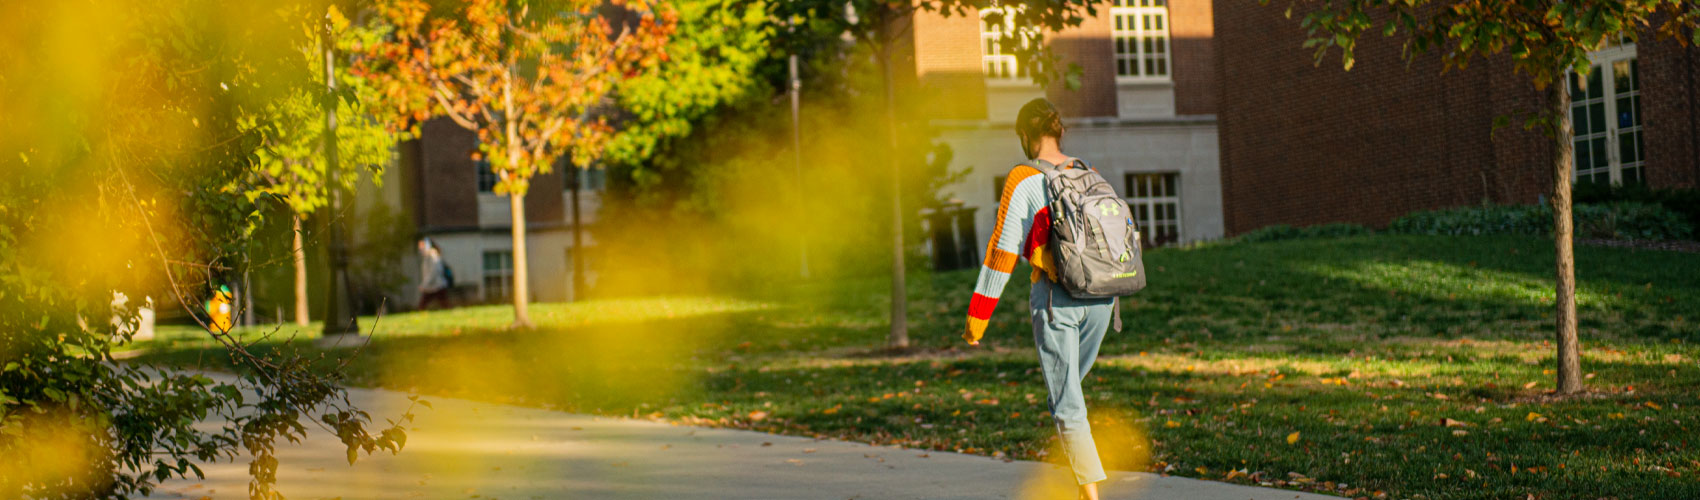 Student walking through campus with backpack